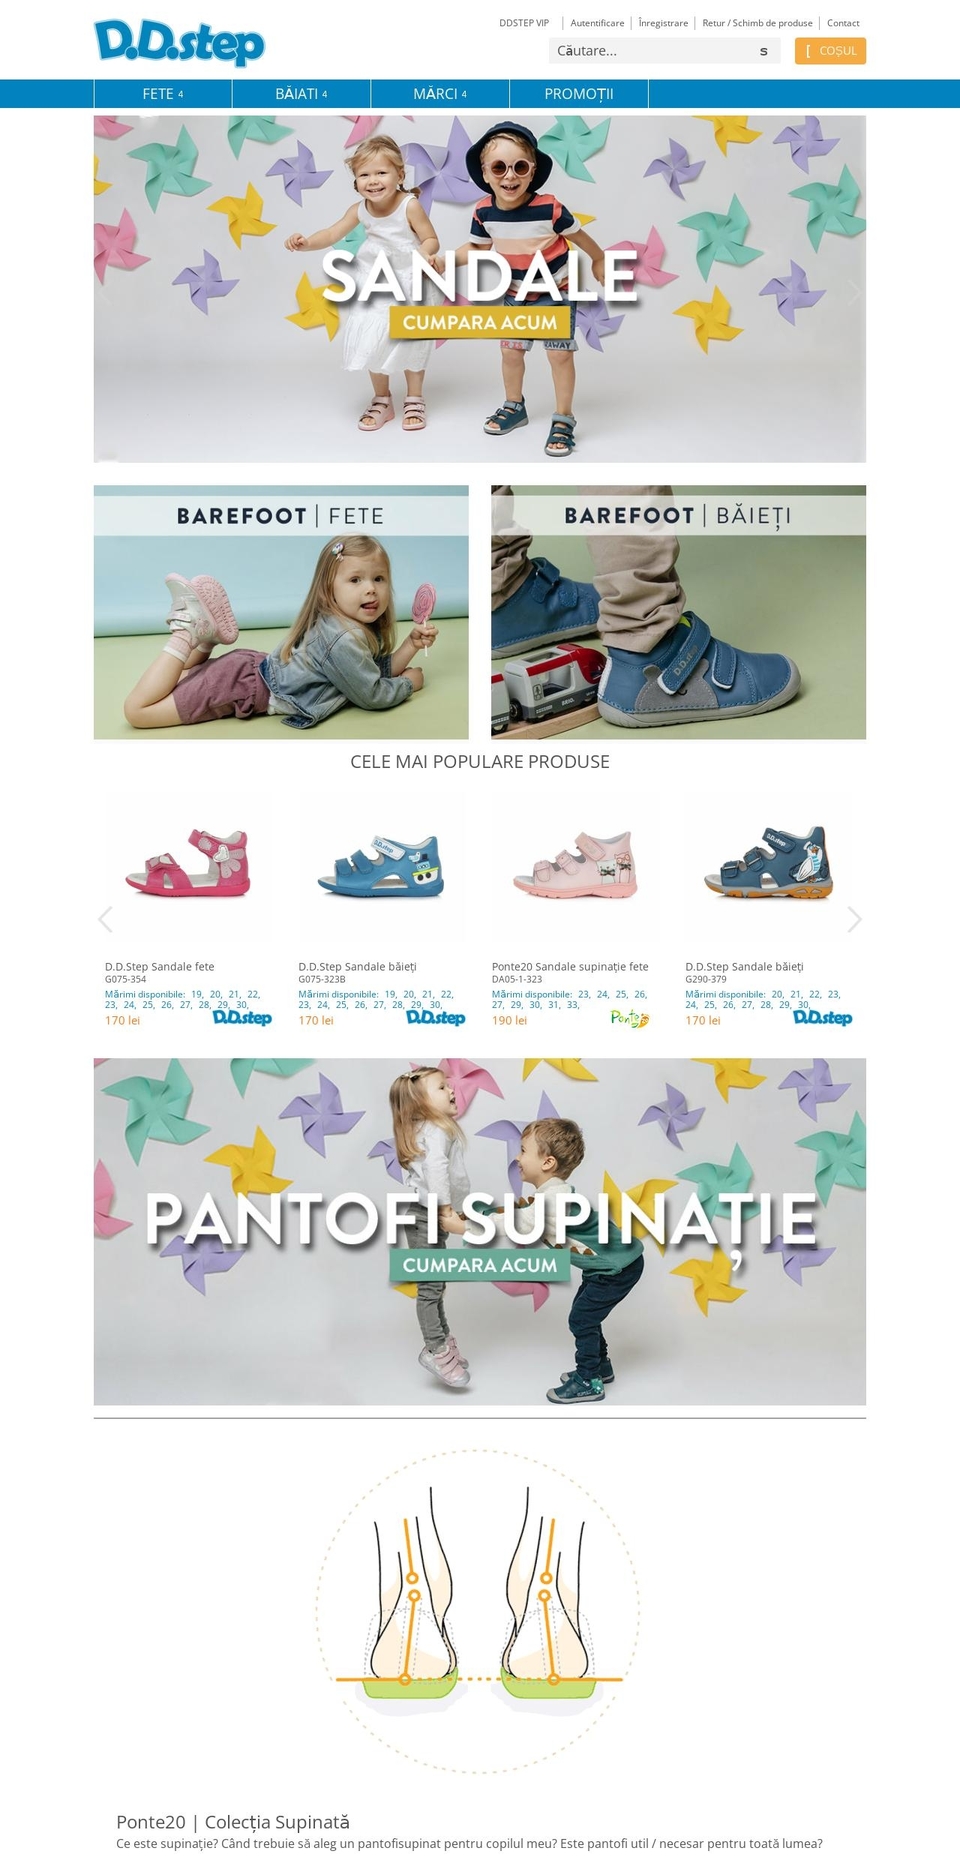 DDStep Shopify theme site example ddsteponline.ro